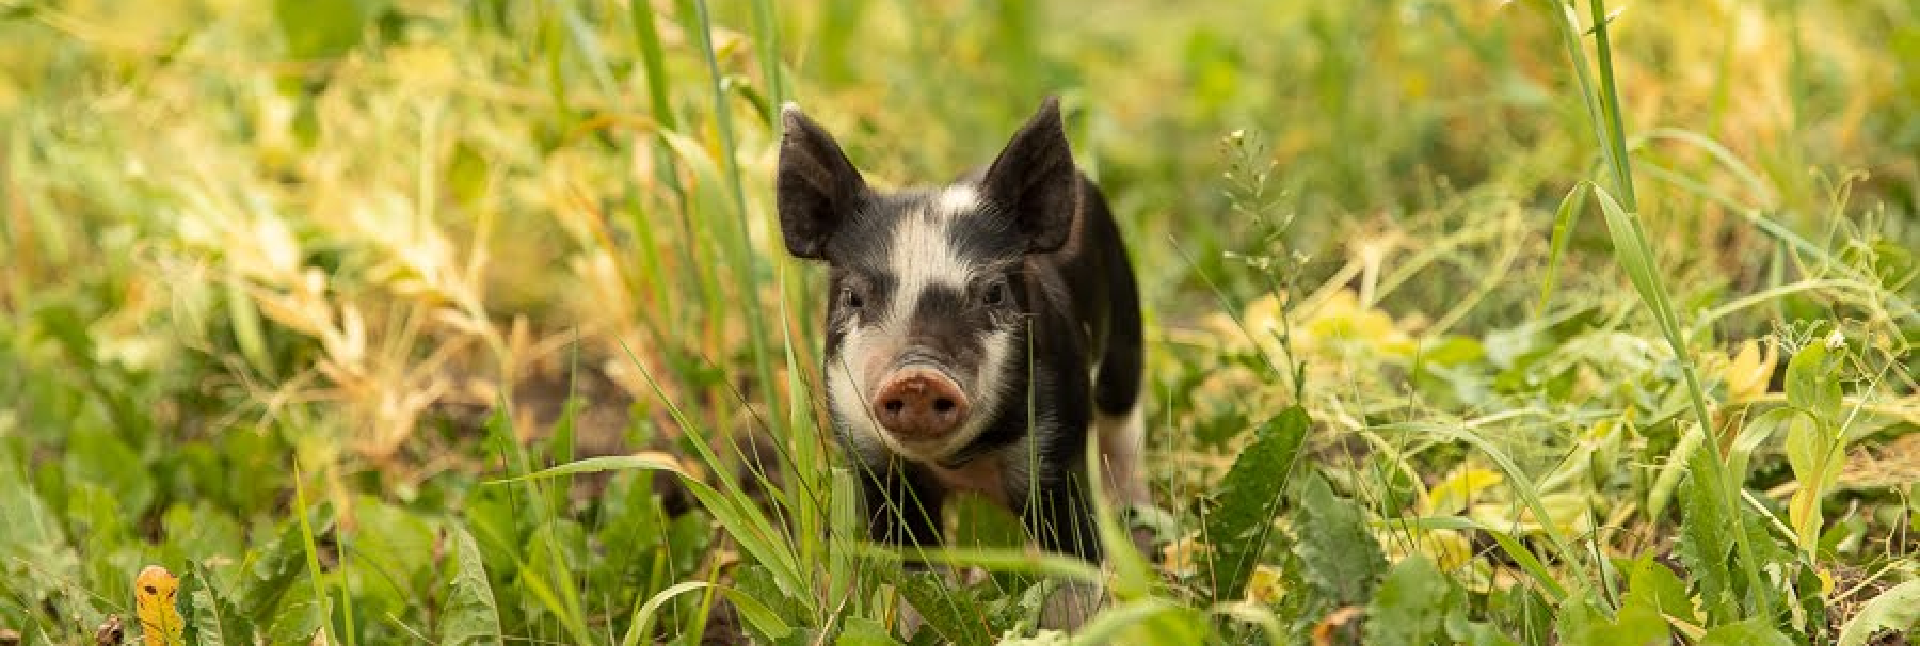 Image of black & white baby pig in the grass.